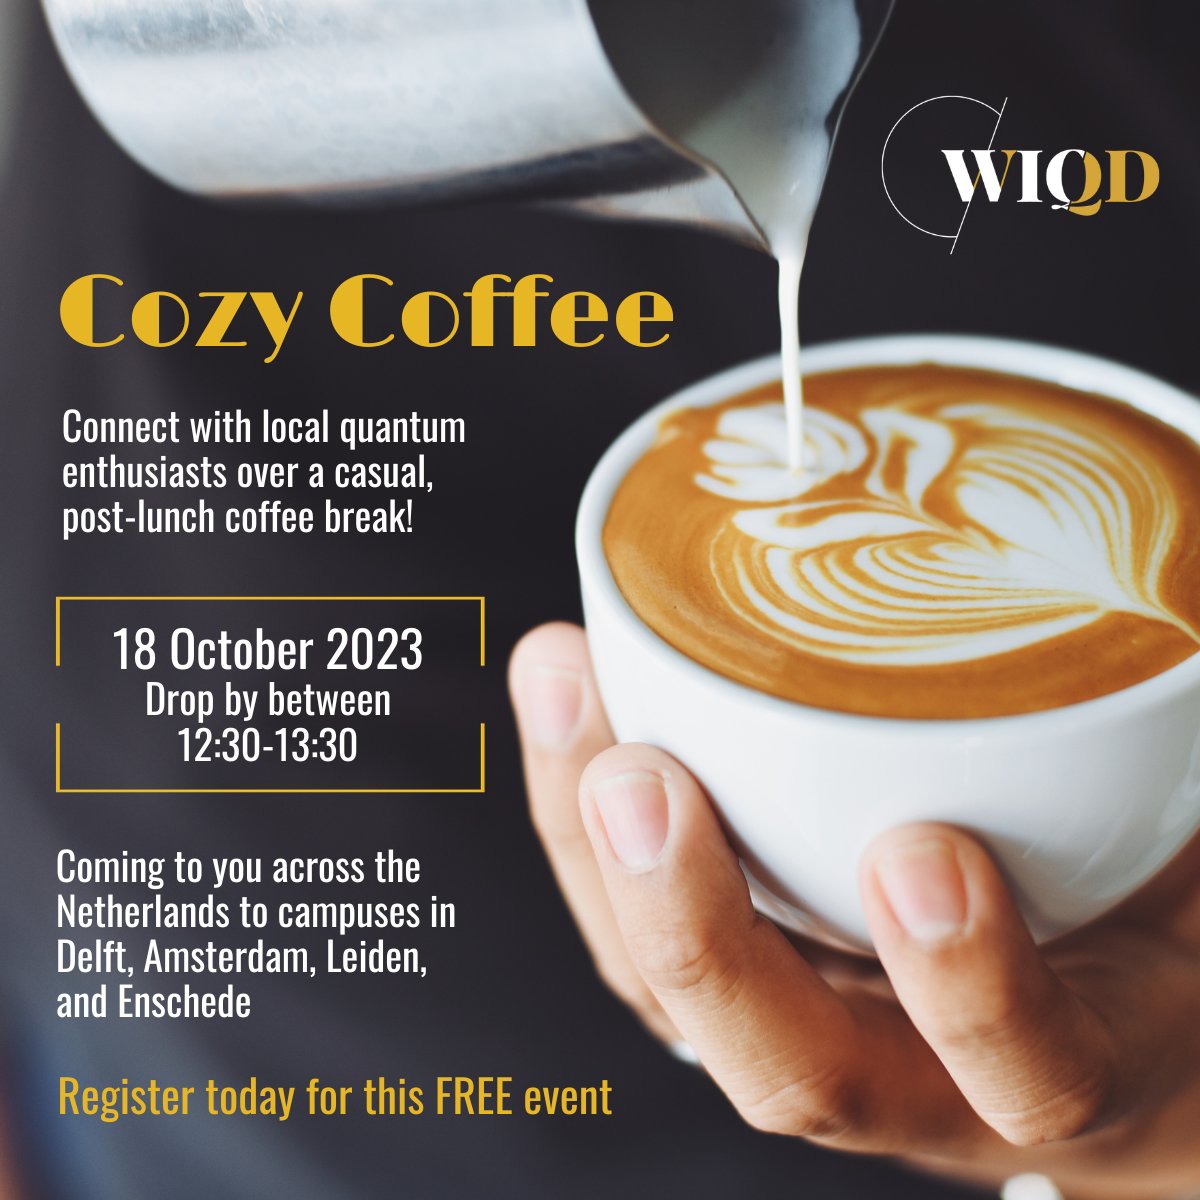 Connect with local #quantum enthusiasts over a coffee after lunch on Wednesday Oct 18! Drop by anytime between 12:30-13:30 for a complimentary coffee or tea on campuses in Delft, Amsterdam, Leiden, and Enschede. Bring your colleagues and register today: forms.gle/8PKS2d6bb4z7e9…